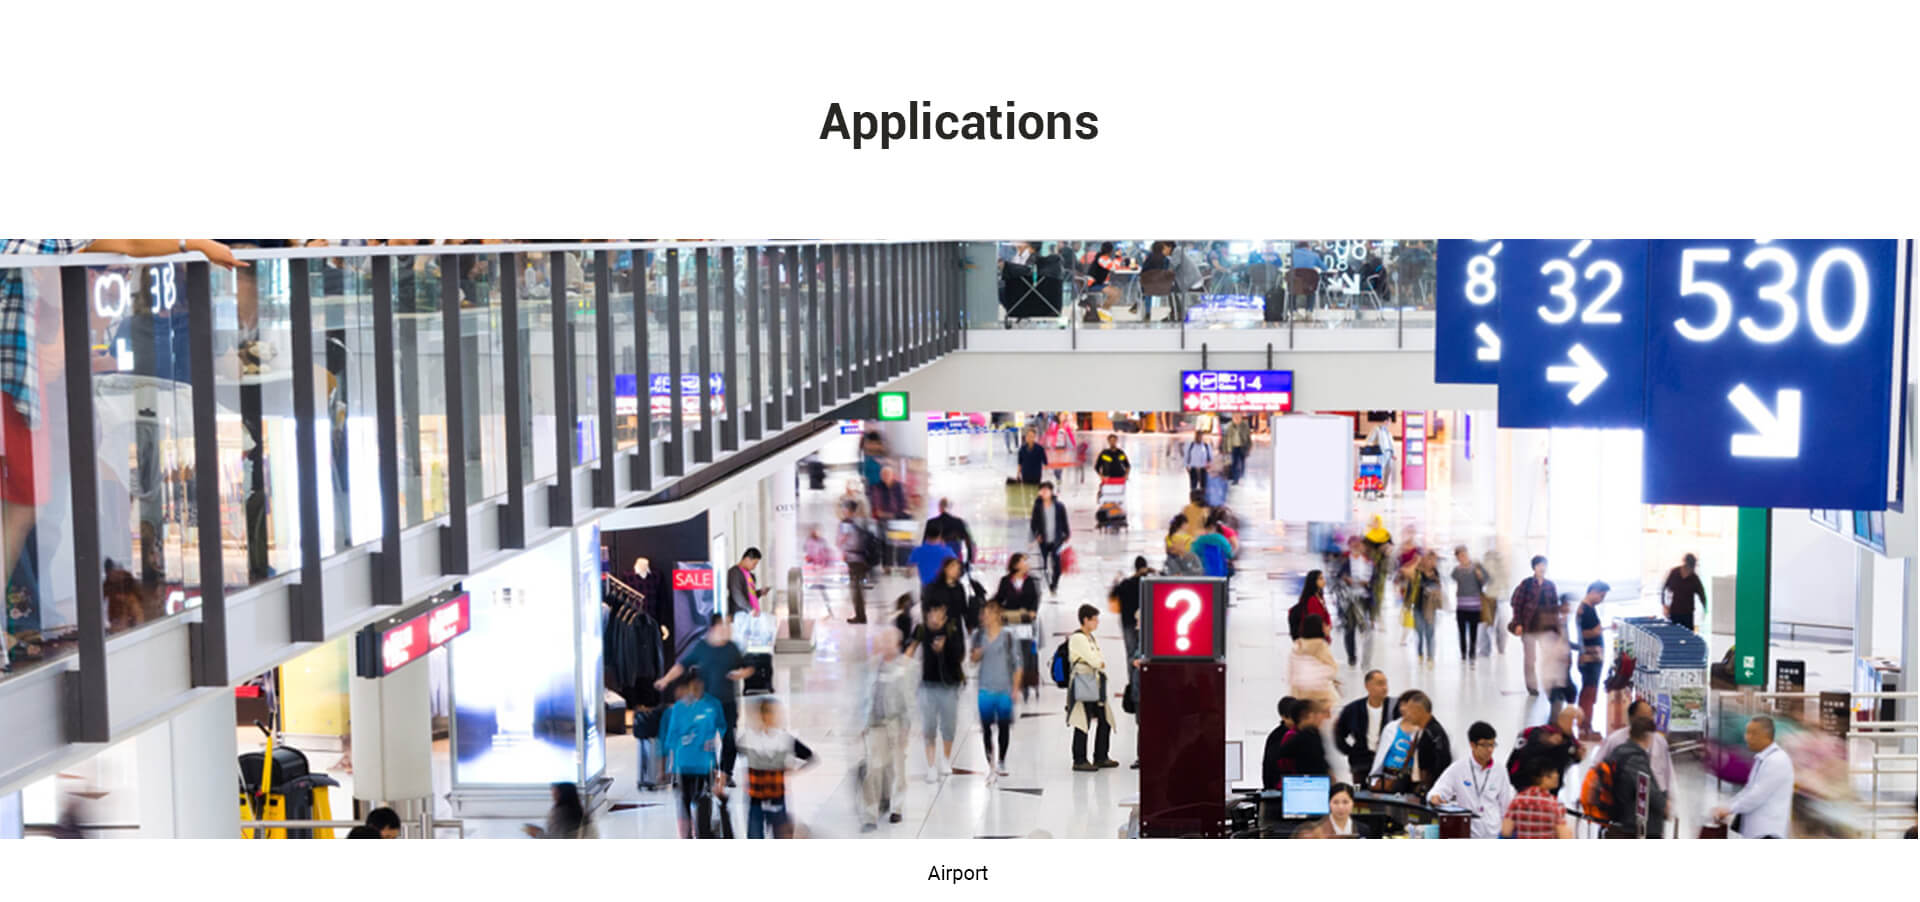 Airport Face Recognition machine Application